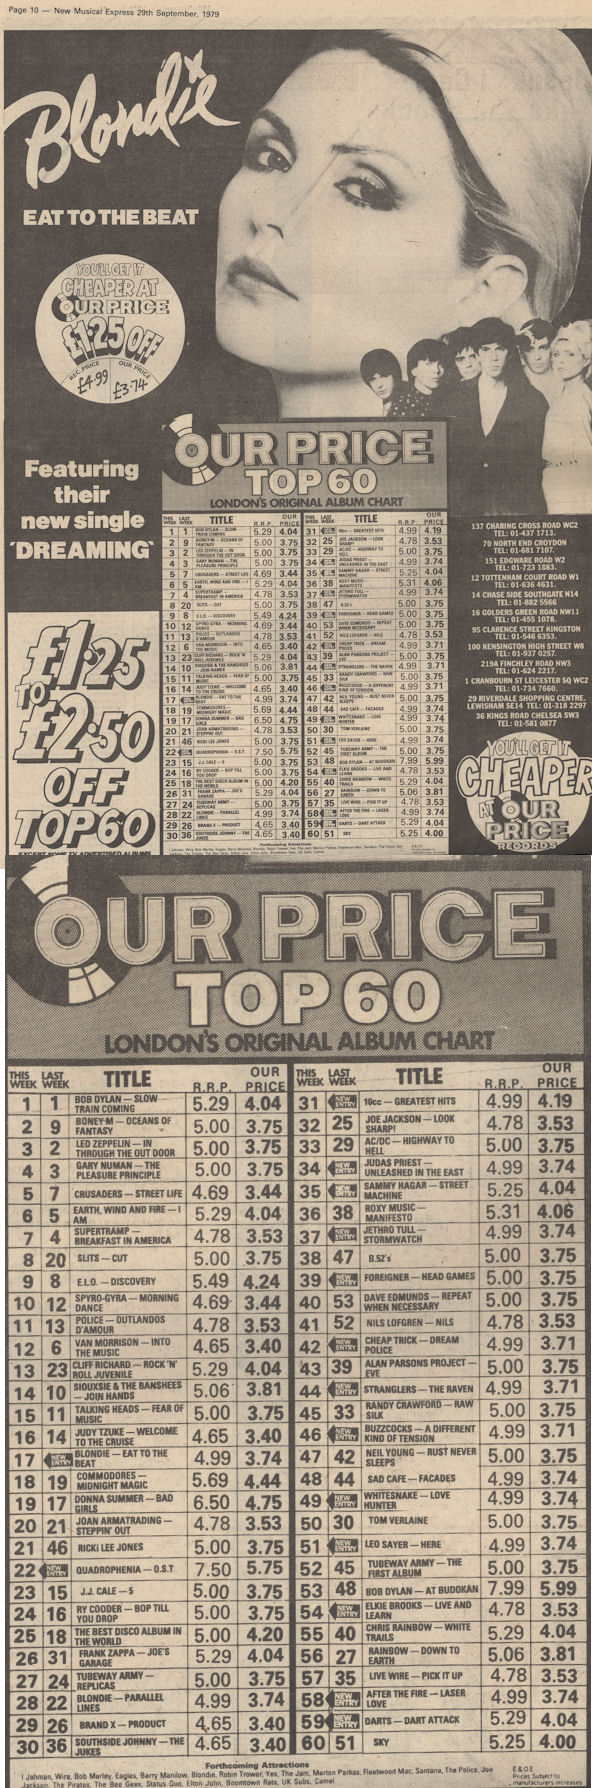 BLOG NME Sept 29 1979 OUR Price Blondie Ad and Top100